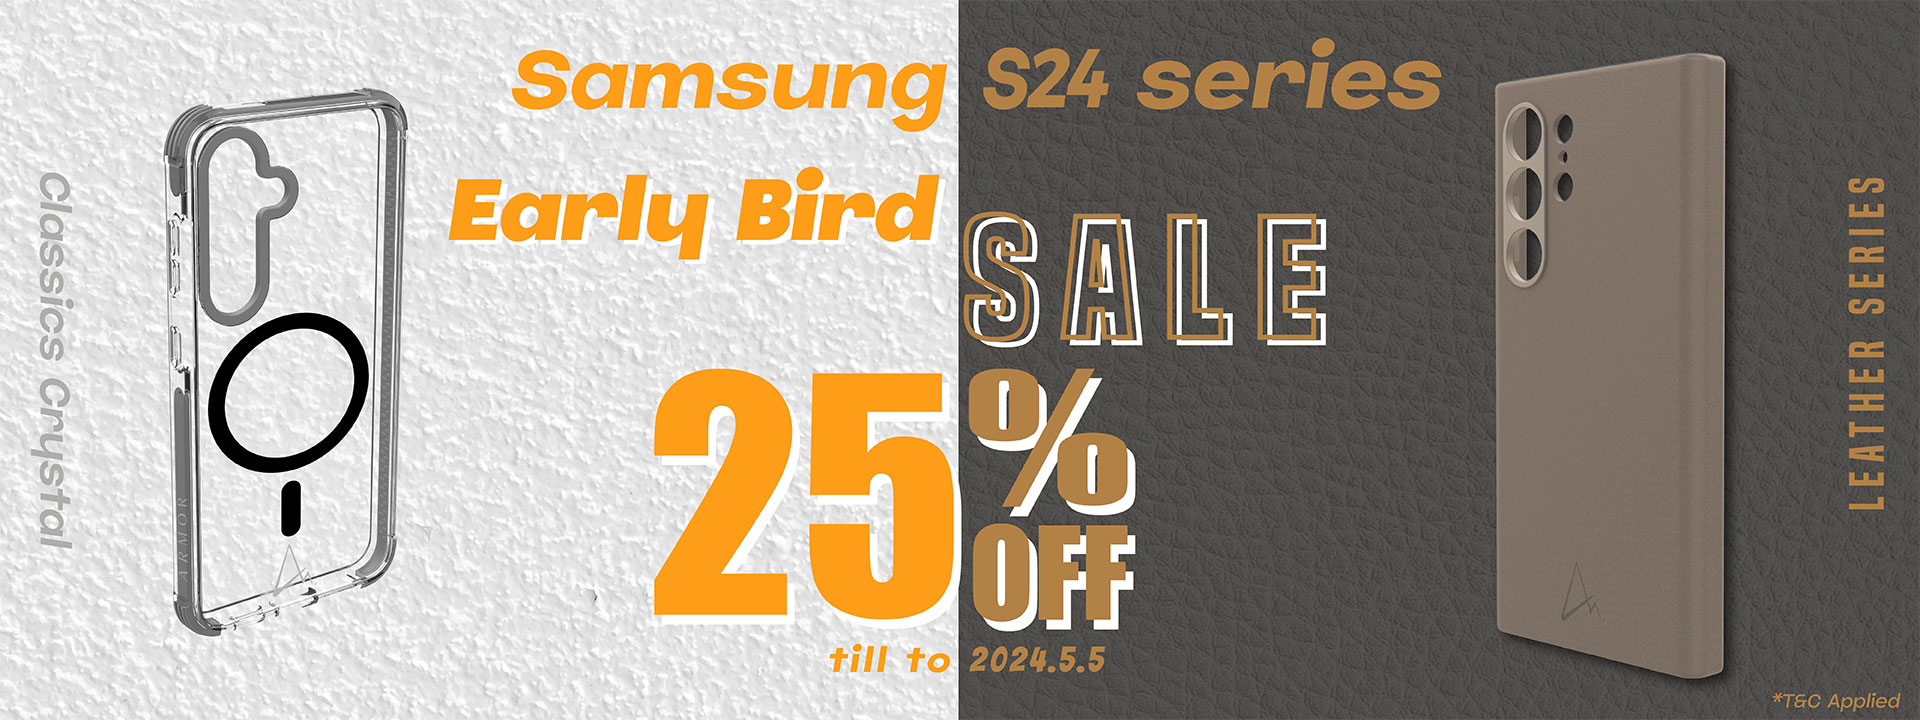 Samsung S24 Series Leather early bird sale